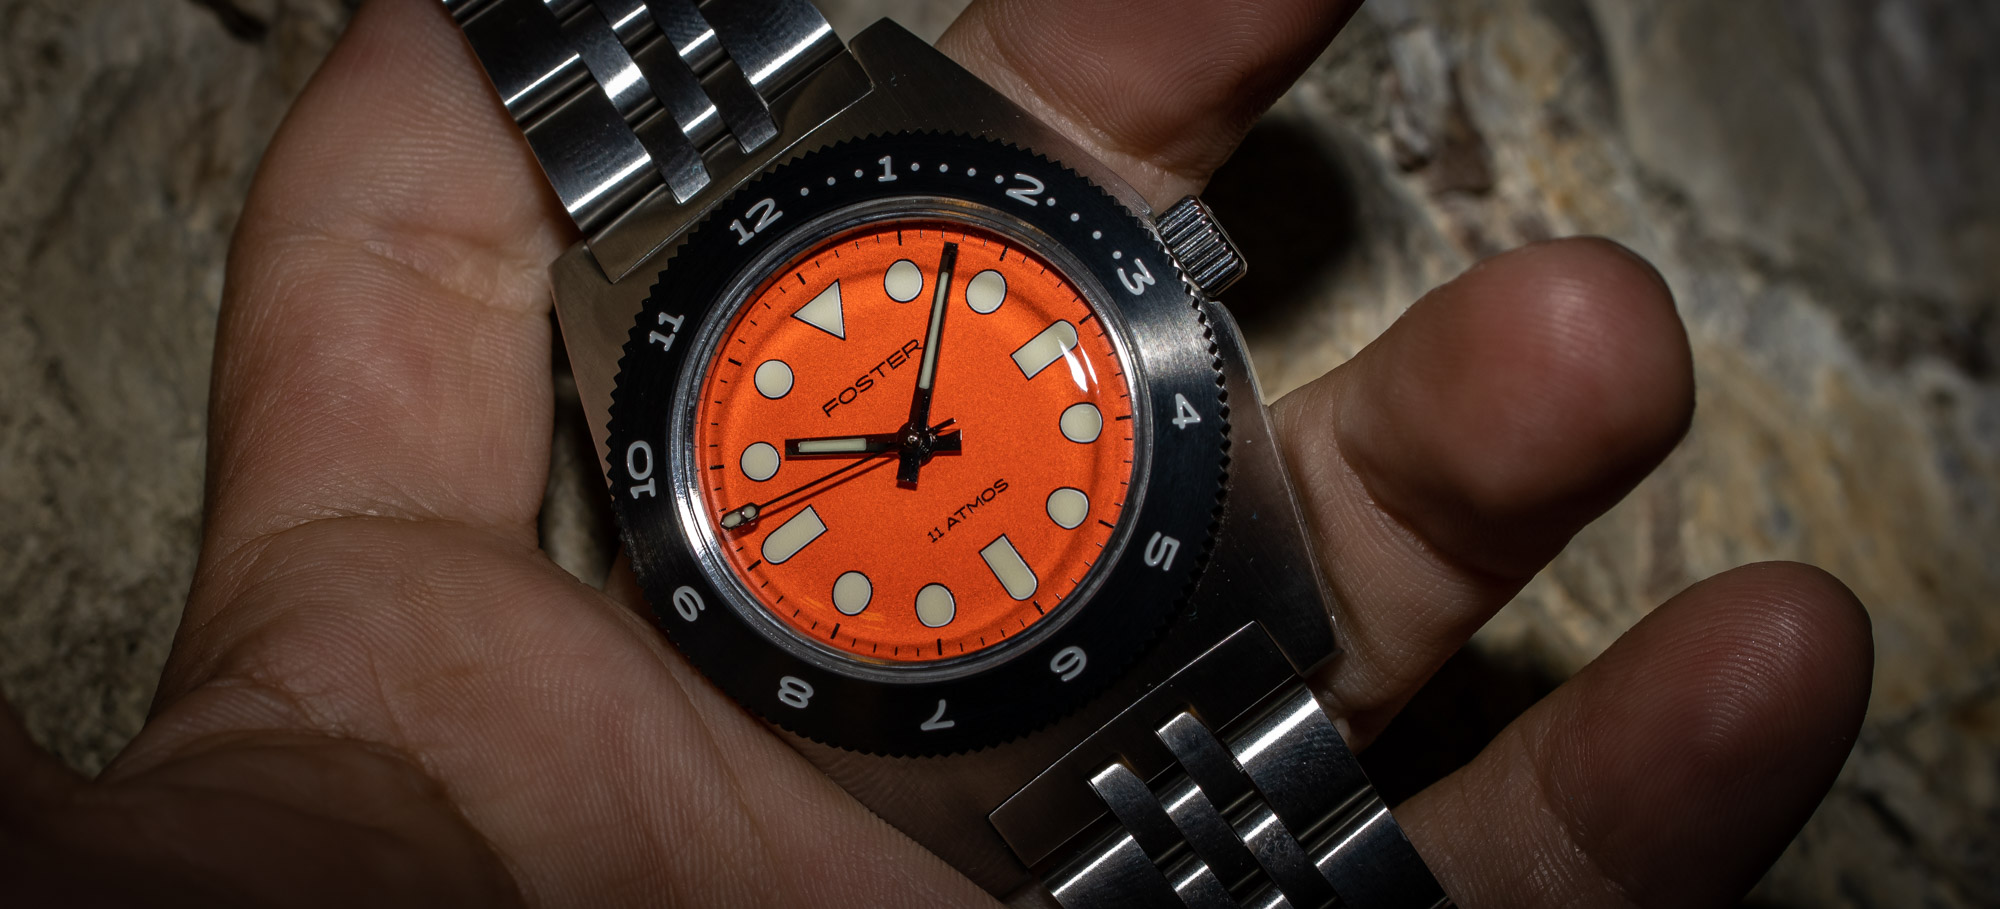 Hands-On Debut: Foster Watch Company 11 Atmos Skin Diver | aBlogtoWatch